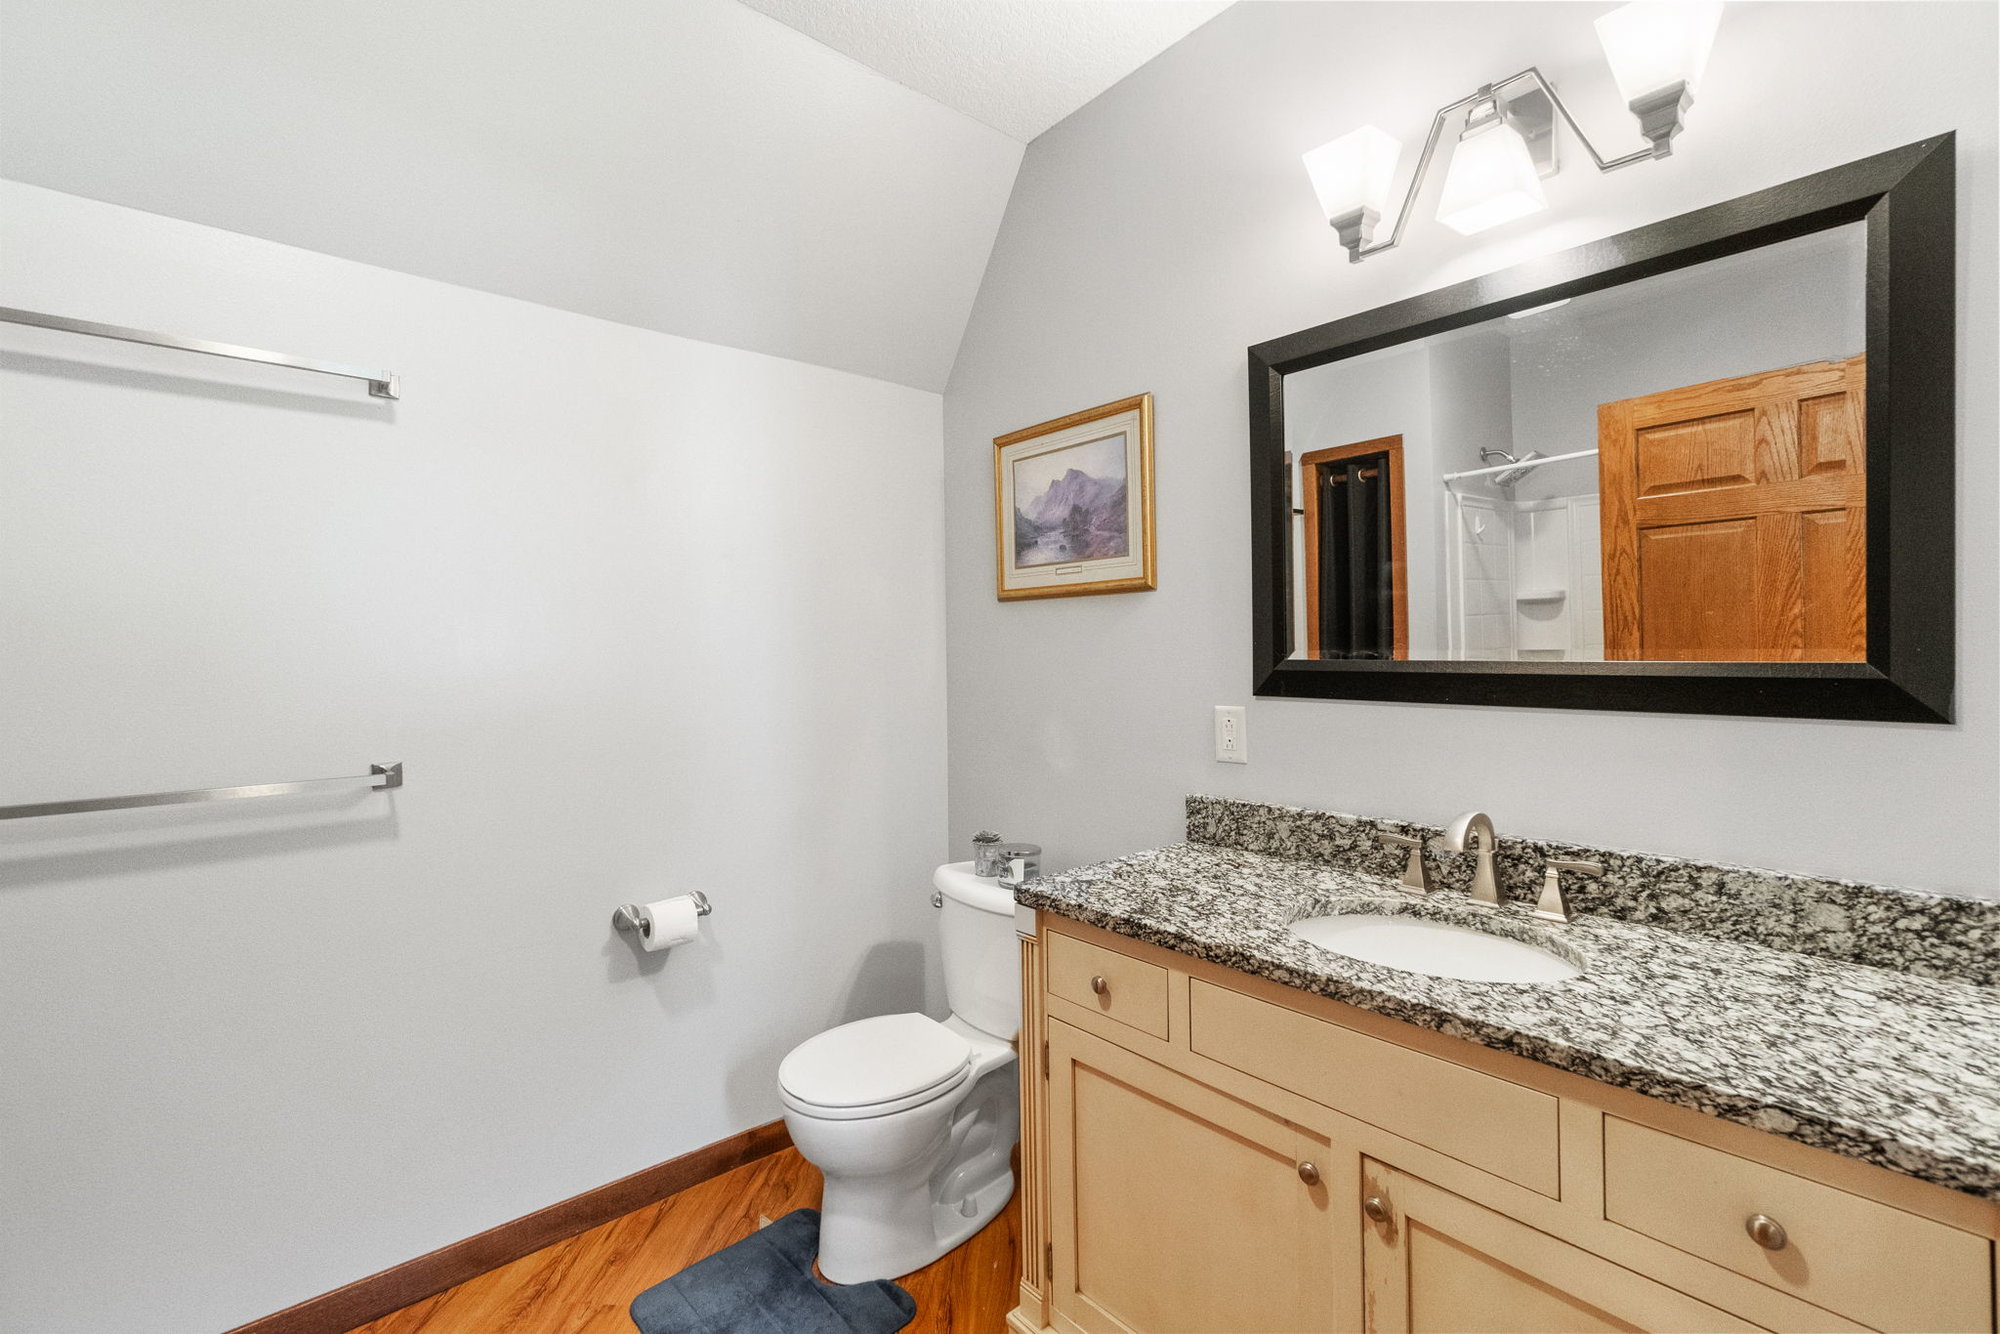 The Perfectly Renovated & Move-In-Ready Home in LaPorte City Iowa